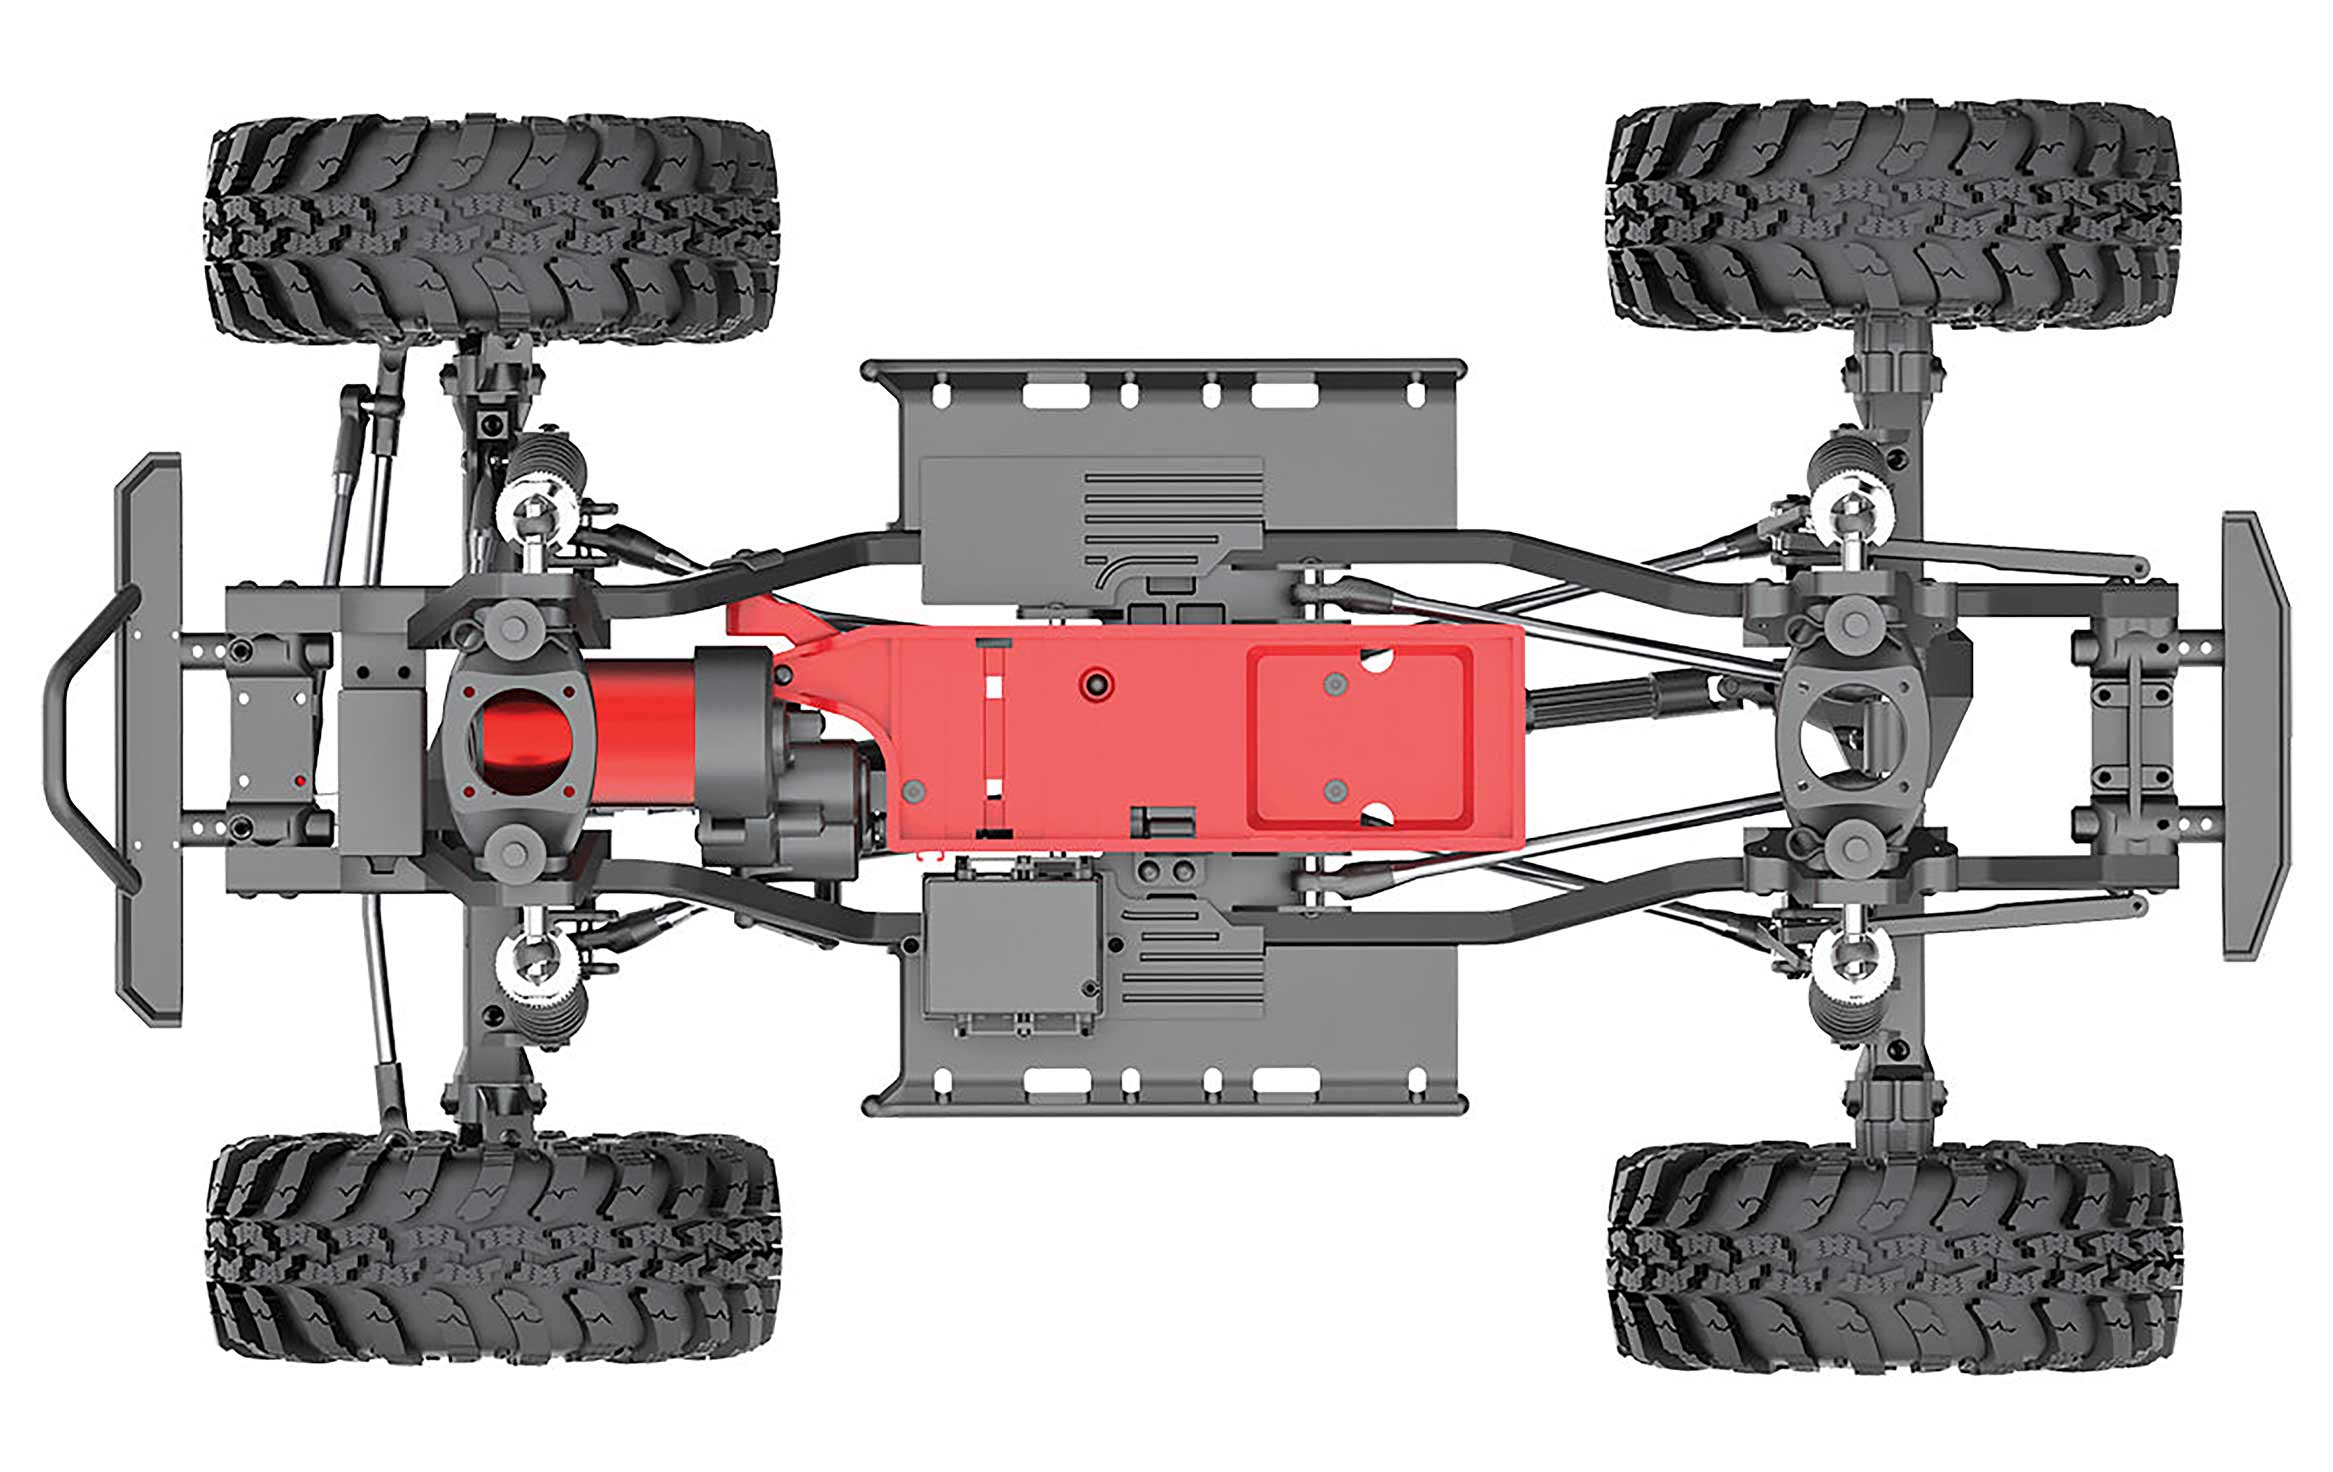 Chassis and Design